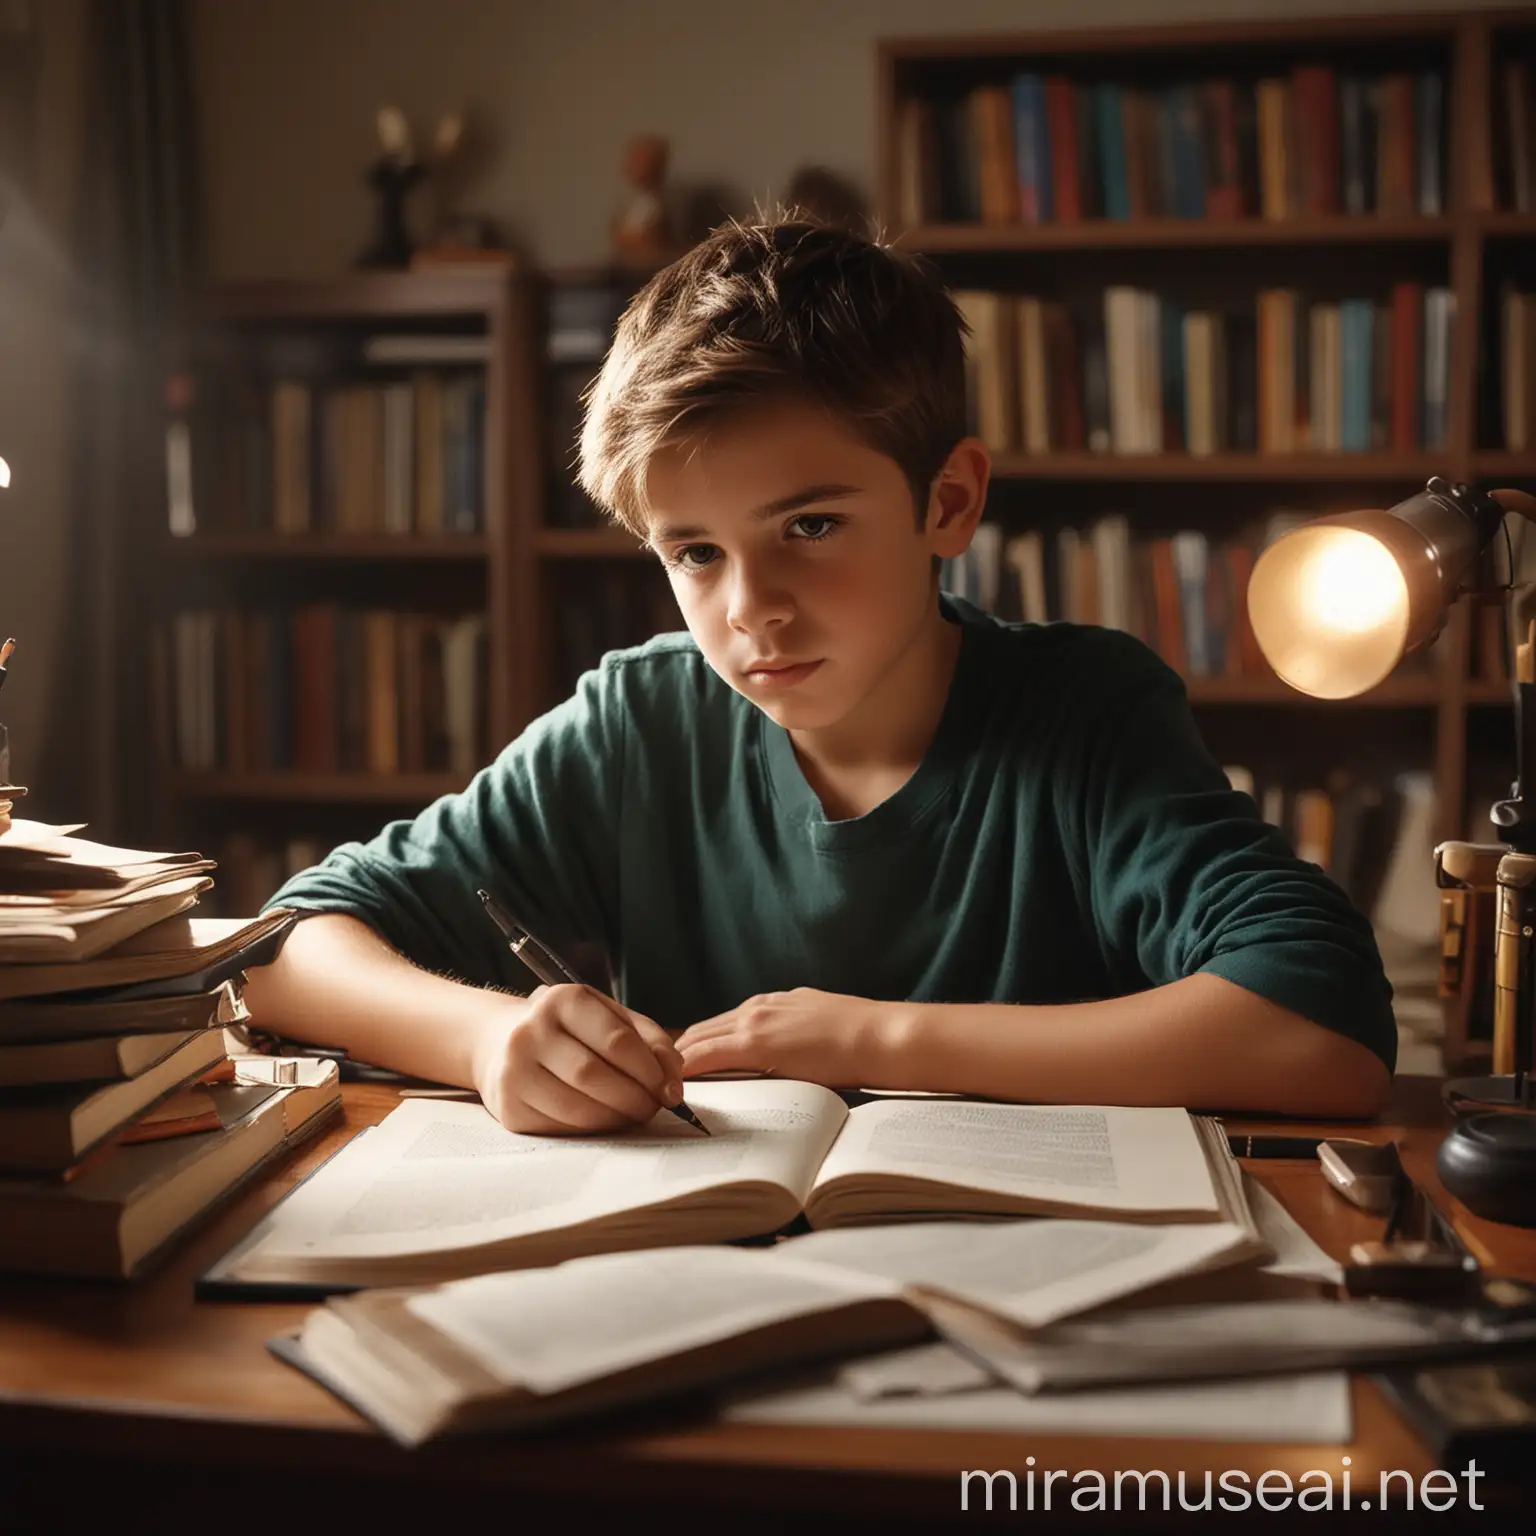  Create a high-resolution image of a young boy studying at his desk, viewed from the front. The entire desk should be visible from the front, with many books and study materials spread across it. The boy should be sitting at the desk, concentrating on his work. Use warm, natural lighting to highlight the details of the books and the boy's focused expression. Apply color grading to give the image a cozy, inviting atmosphere, with soft, balanced tones that enhance the overall warmth and focus of the scene. The background should be simple, ensuring the desk and the studying boy are the primary focus of the image."